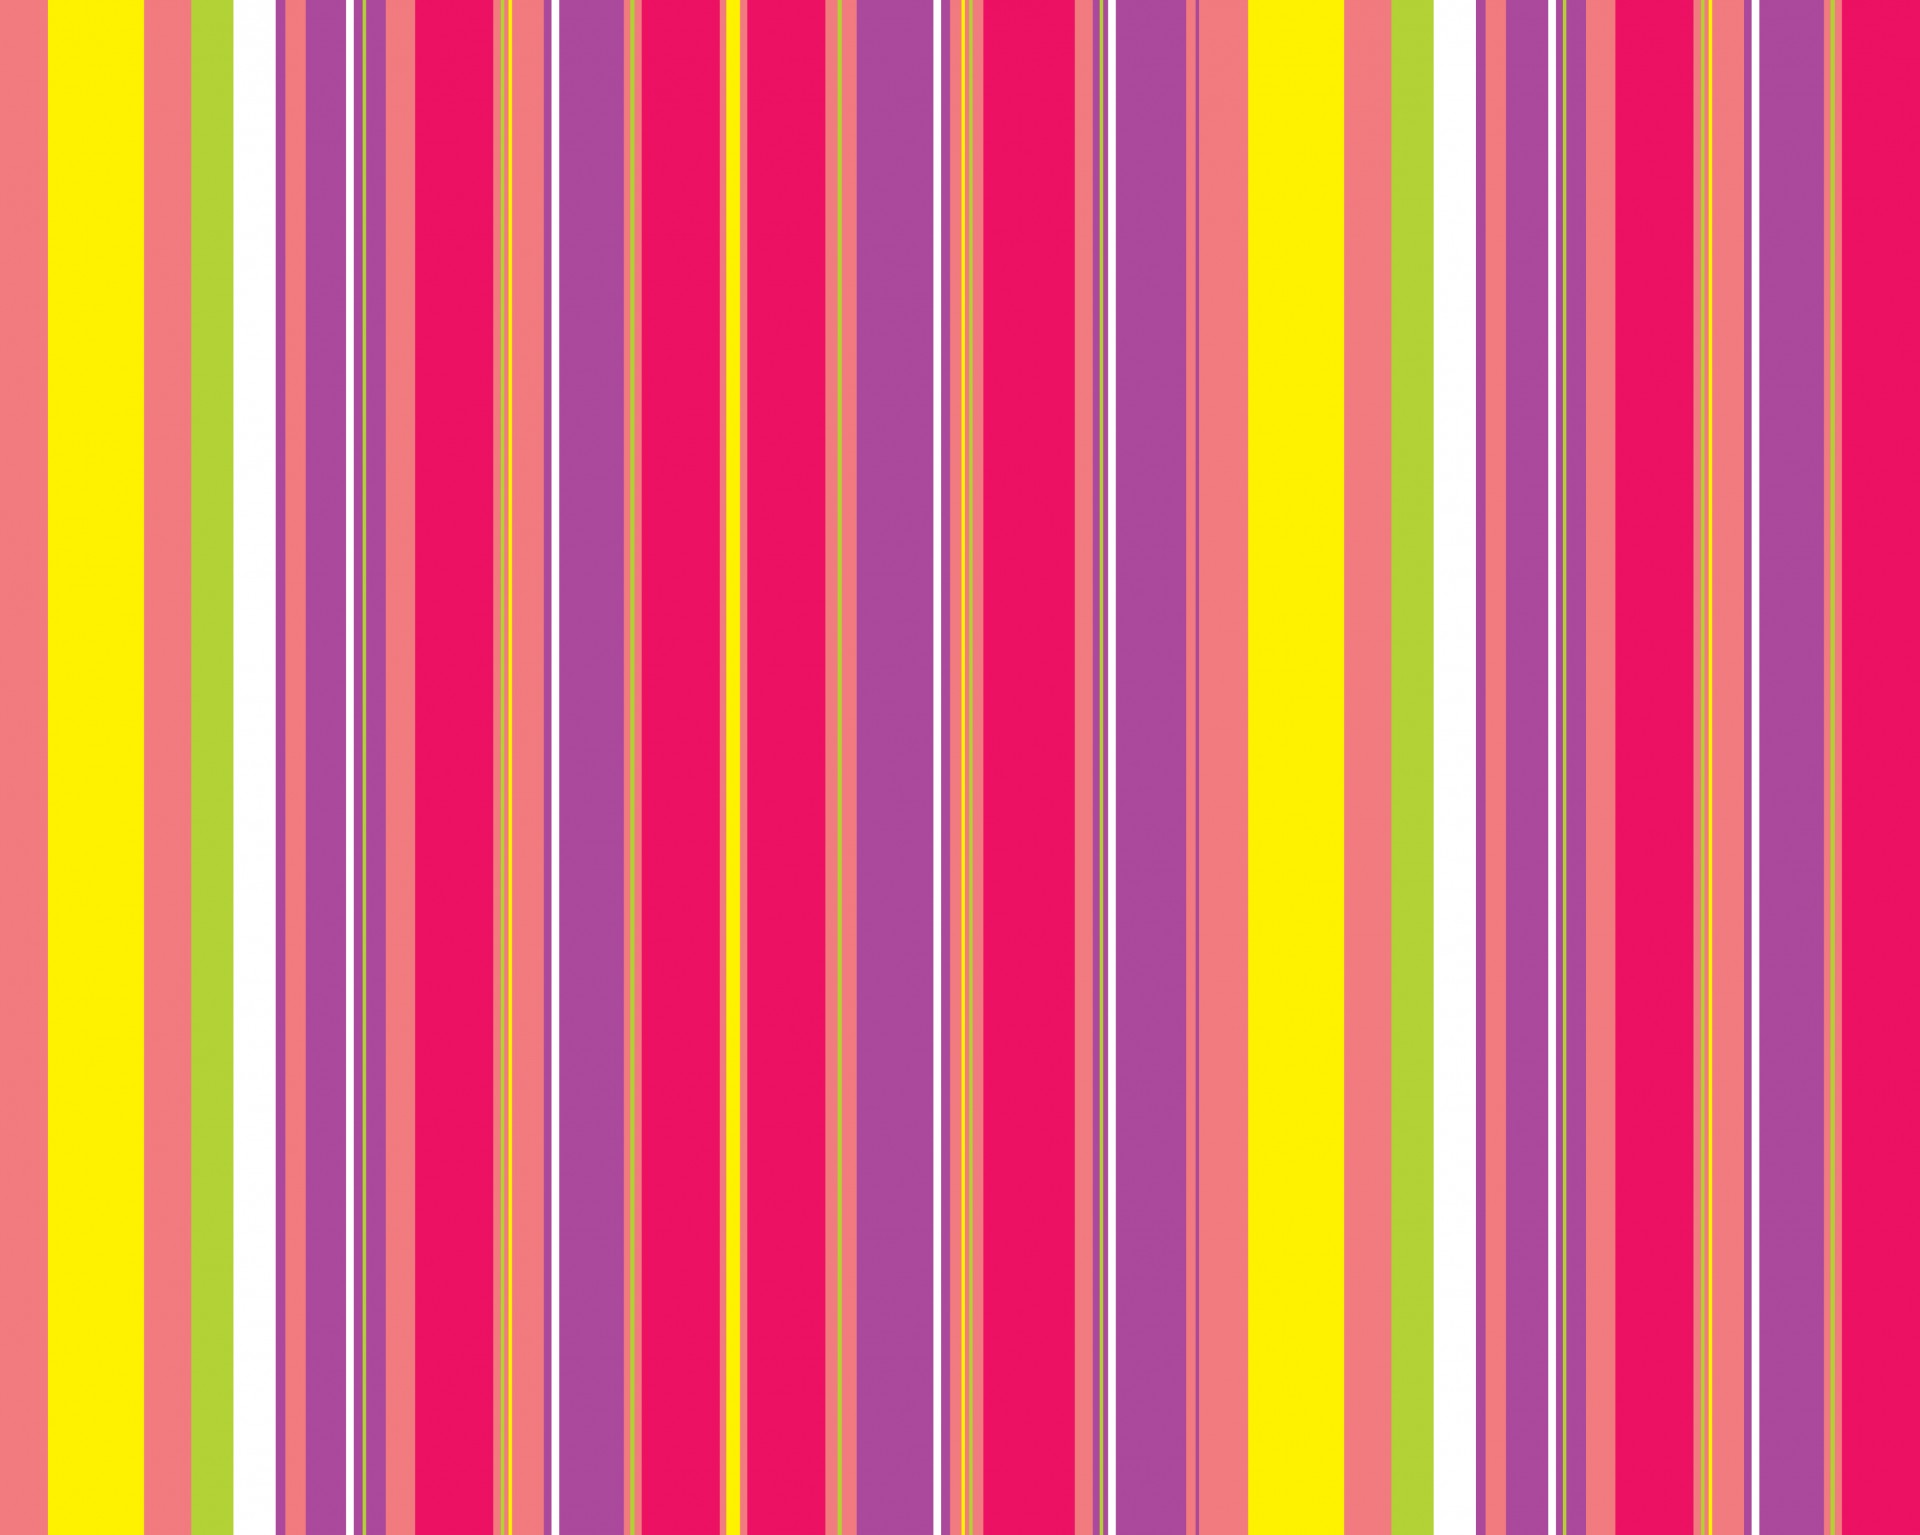 Colorful striped background Poster